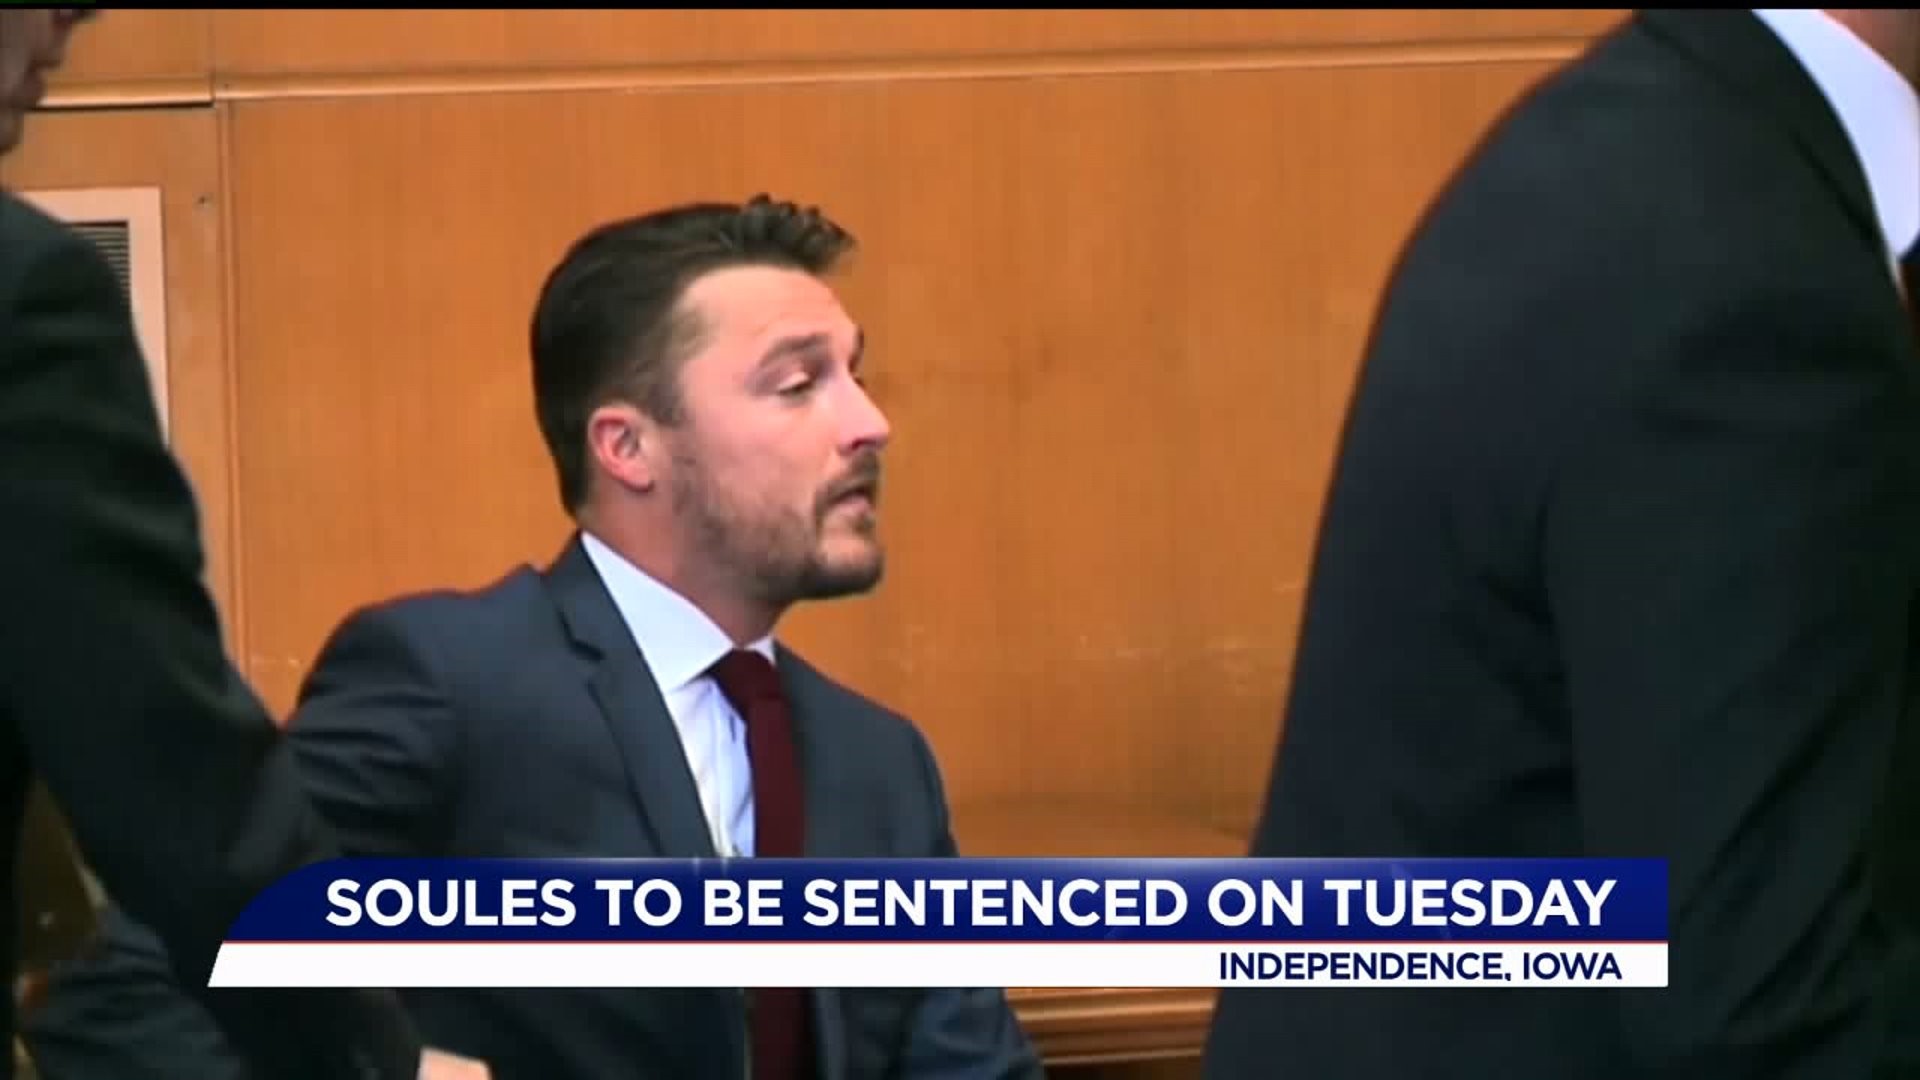 Chris Soules to be sentenced Tuesday